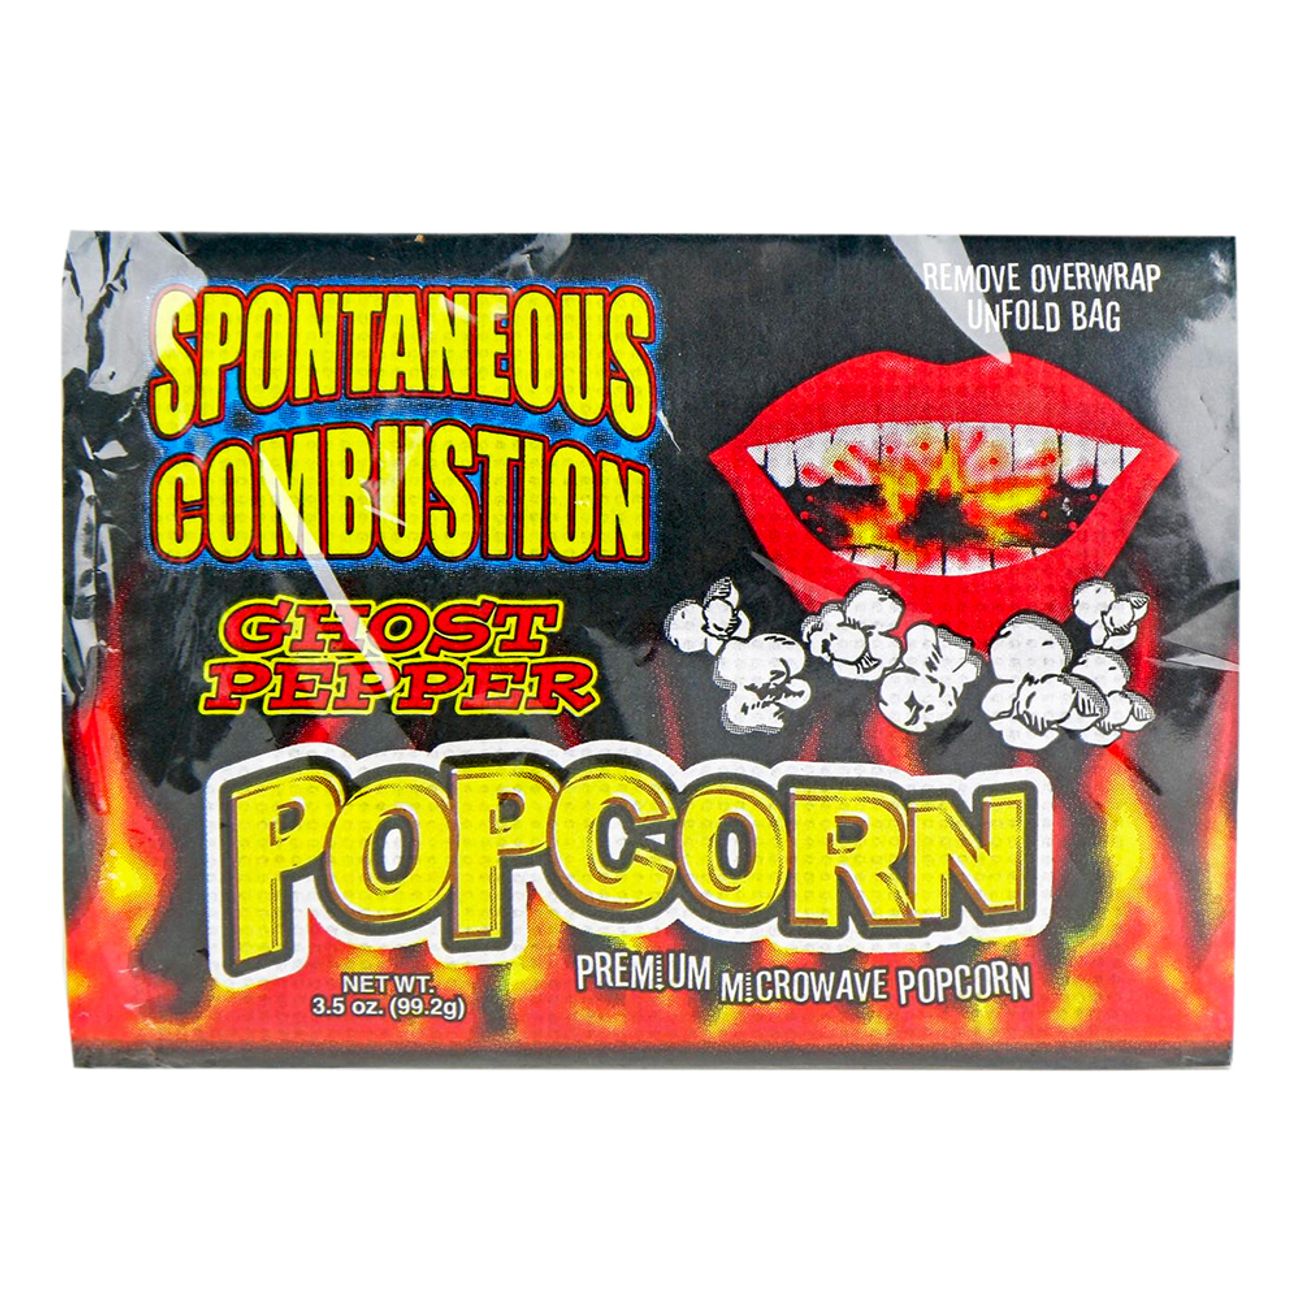 spontaneous-combustion-ghost-pepper-popcorn-1